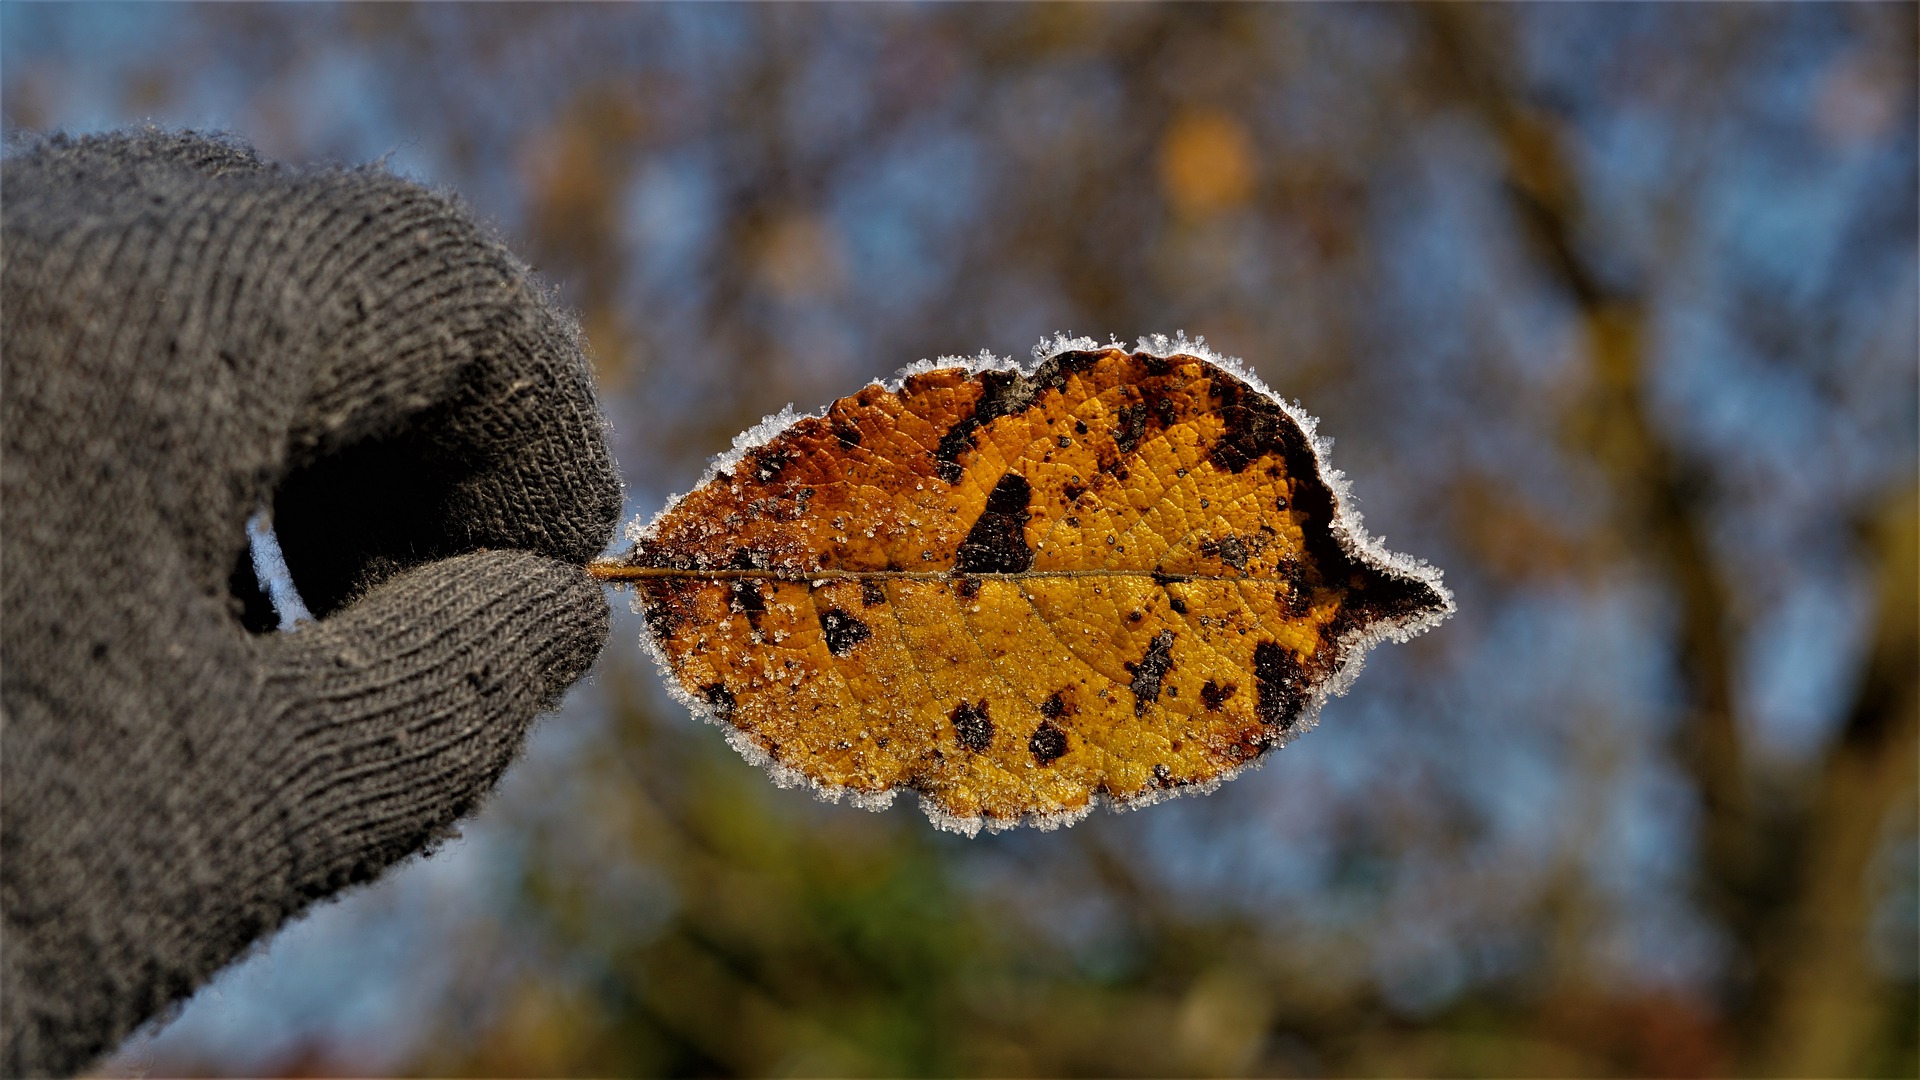 Picture of an autumn leaf edged in lacy ice